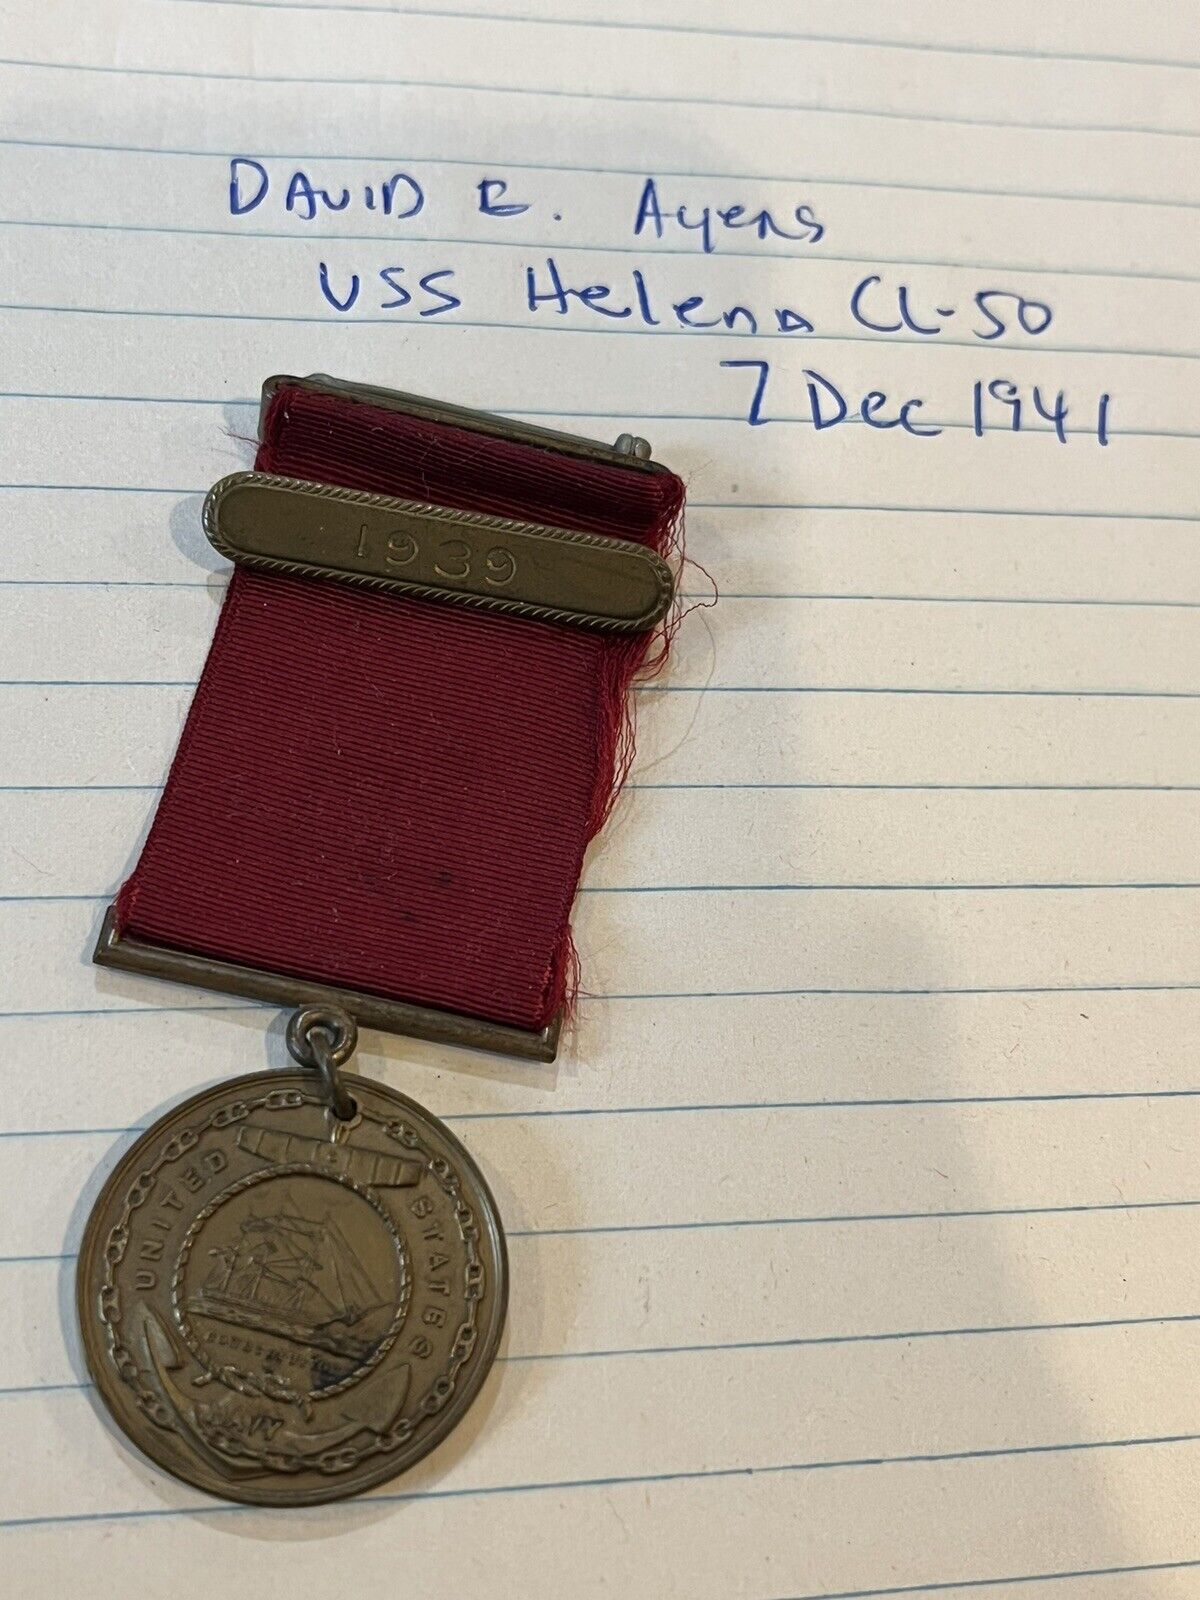 Named & Dated Pre Ww2 US Navy Good Conduct Medal Group to a Pearl Harbor Vet